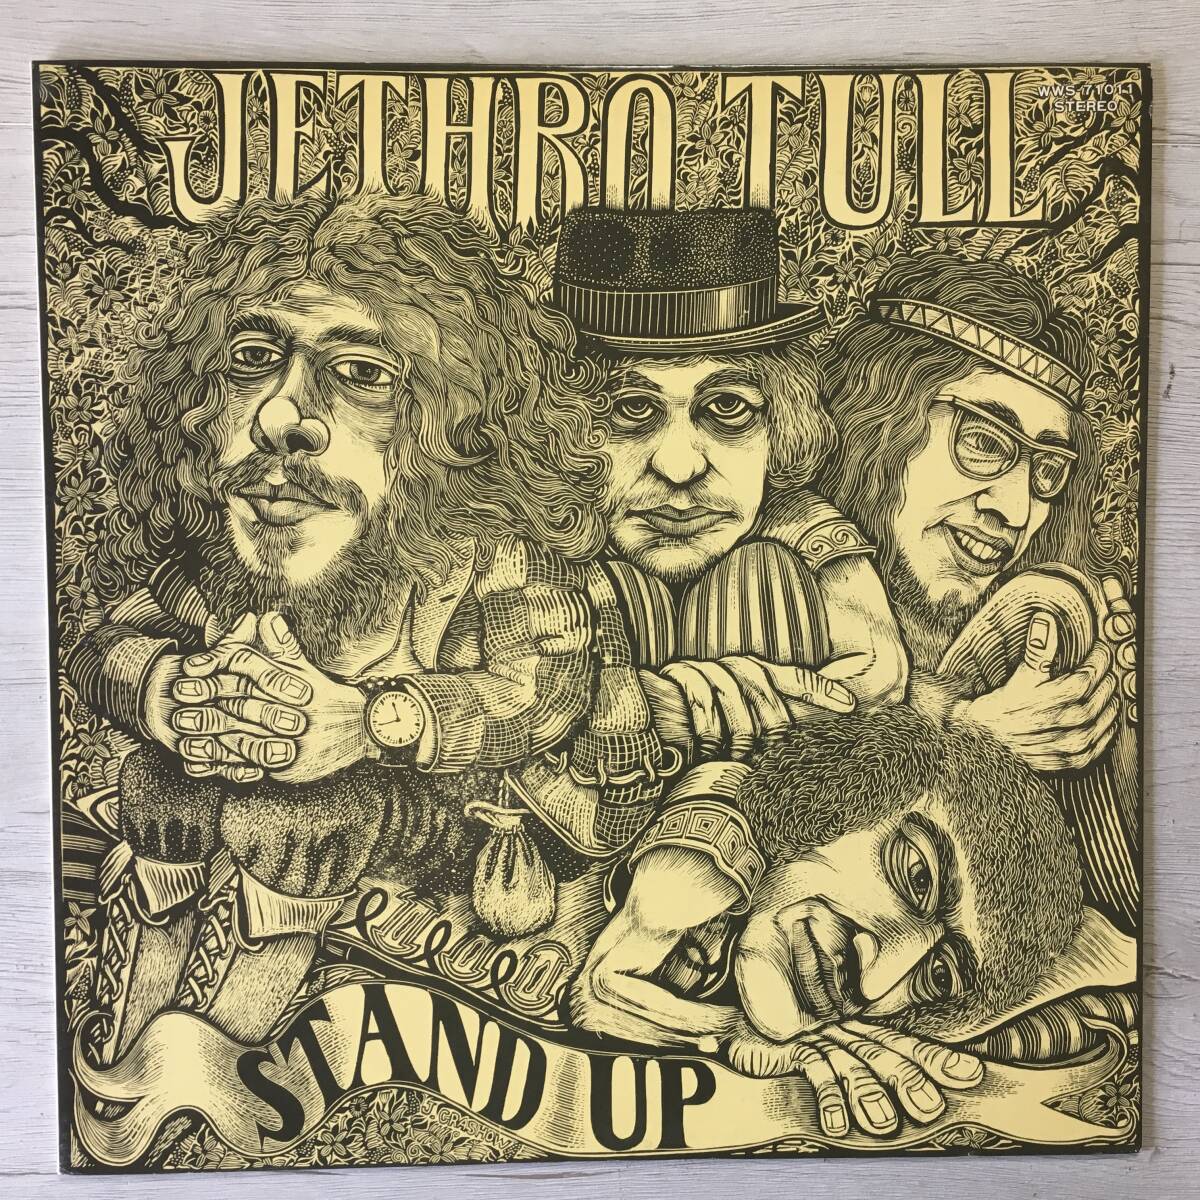 PROMO JETHRO TULL STAND UP 